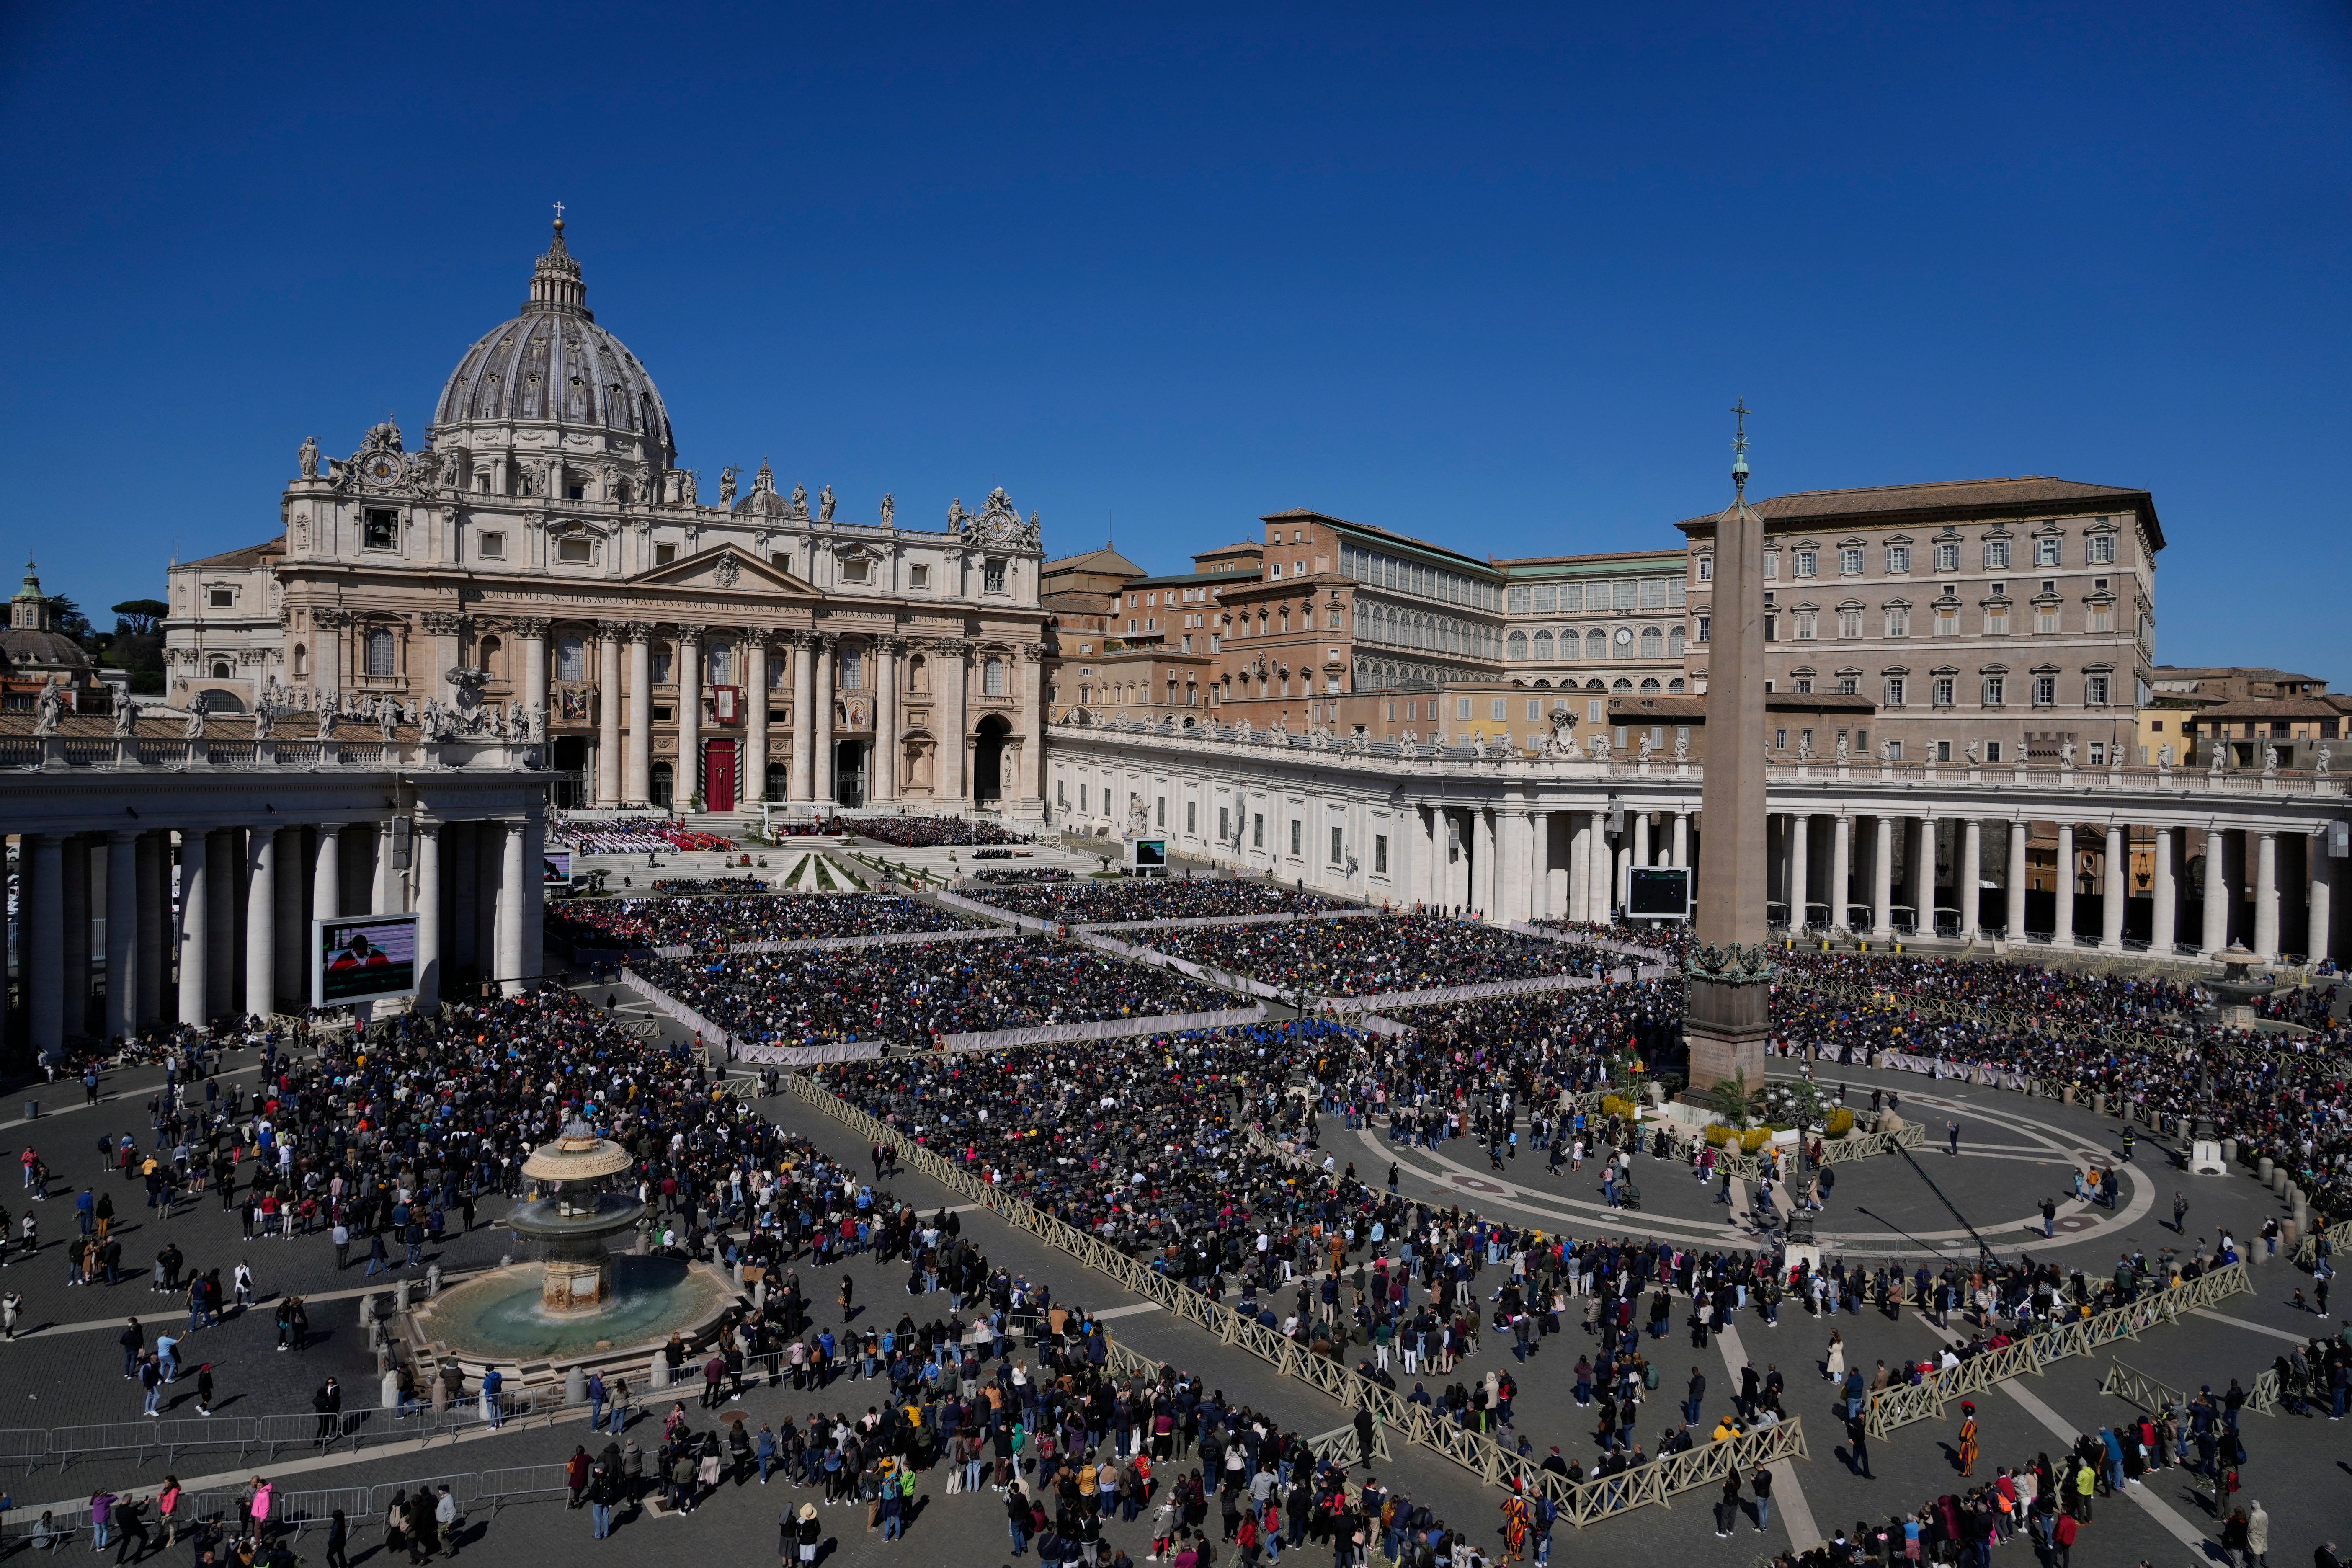 St. Peter Square in Rome.